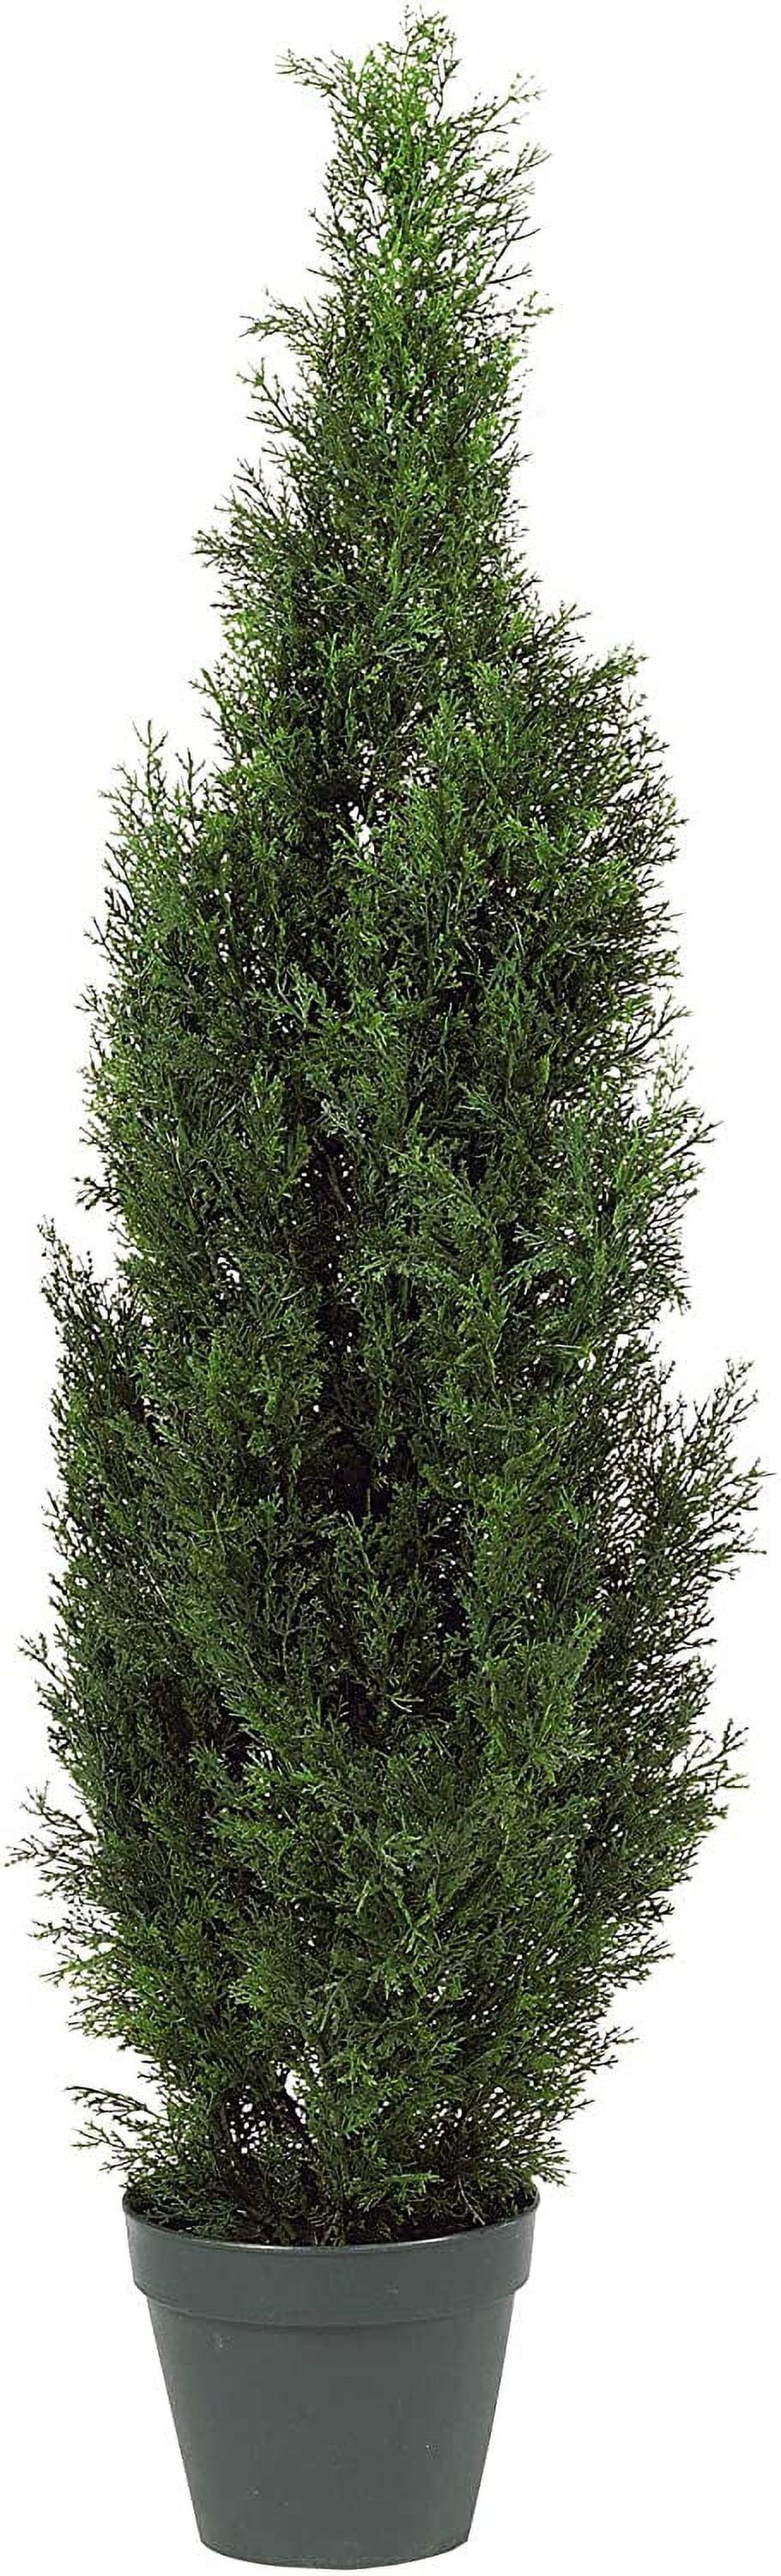 50" Green Silk Potted Outdoor Topiary